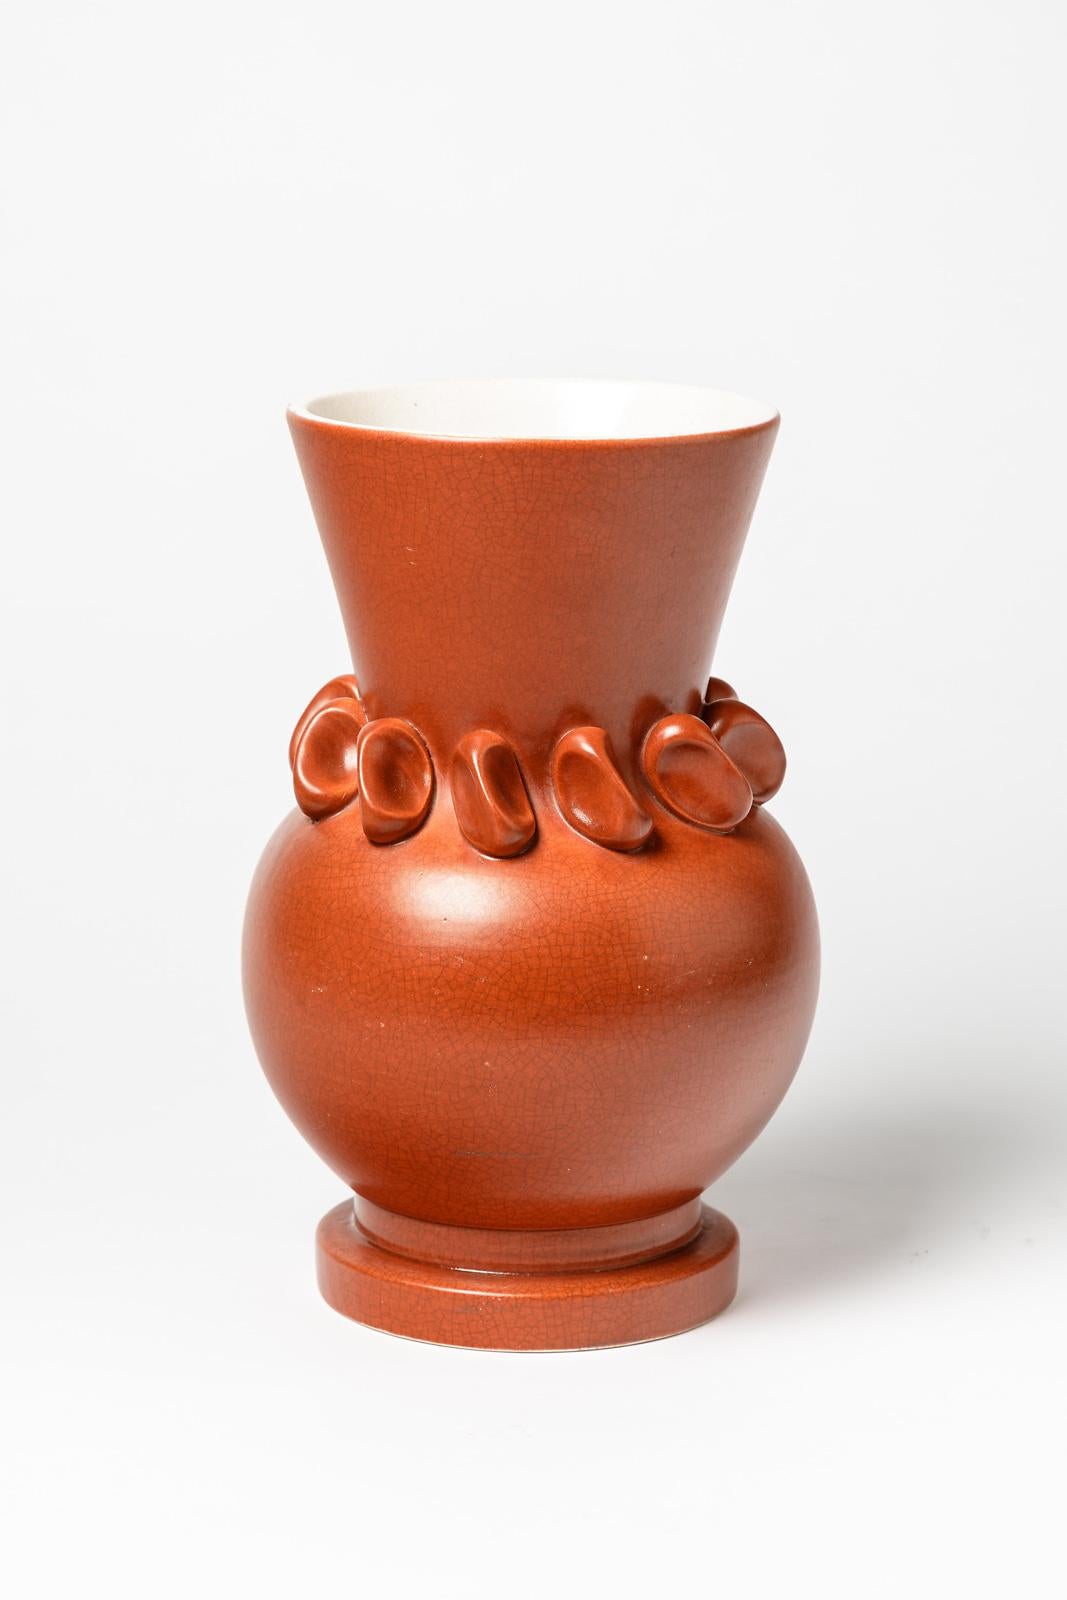 Pol Chambost

Made in France, original orange midcentury ceramic vase by the french artist.

Realised circa 1950

Original perfect condition

Interior with white ceramic glaze color

Signed under the base: MADE IN FRANCE

Measures: